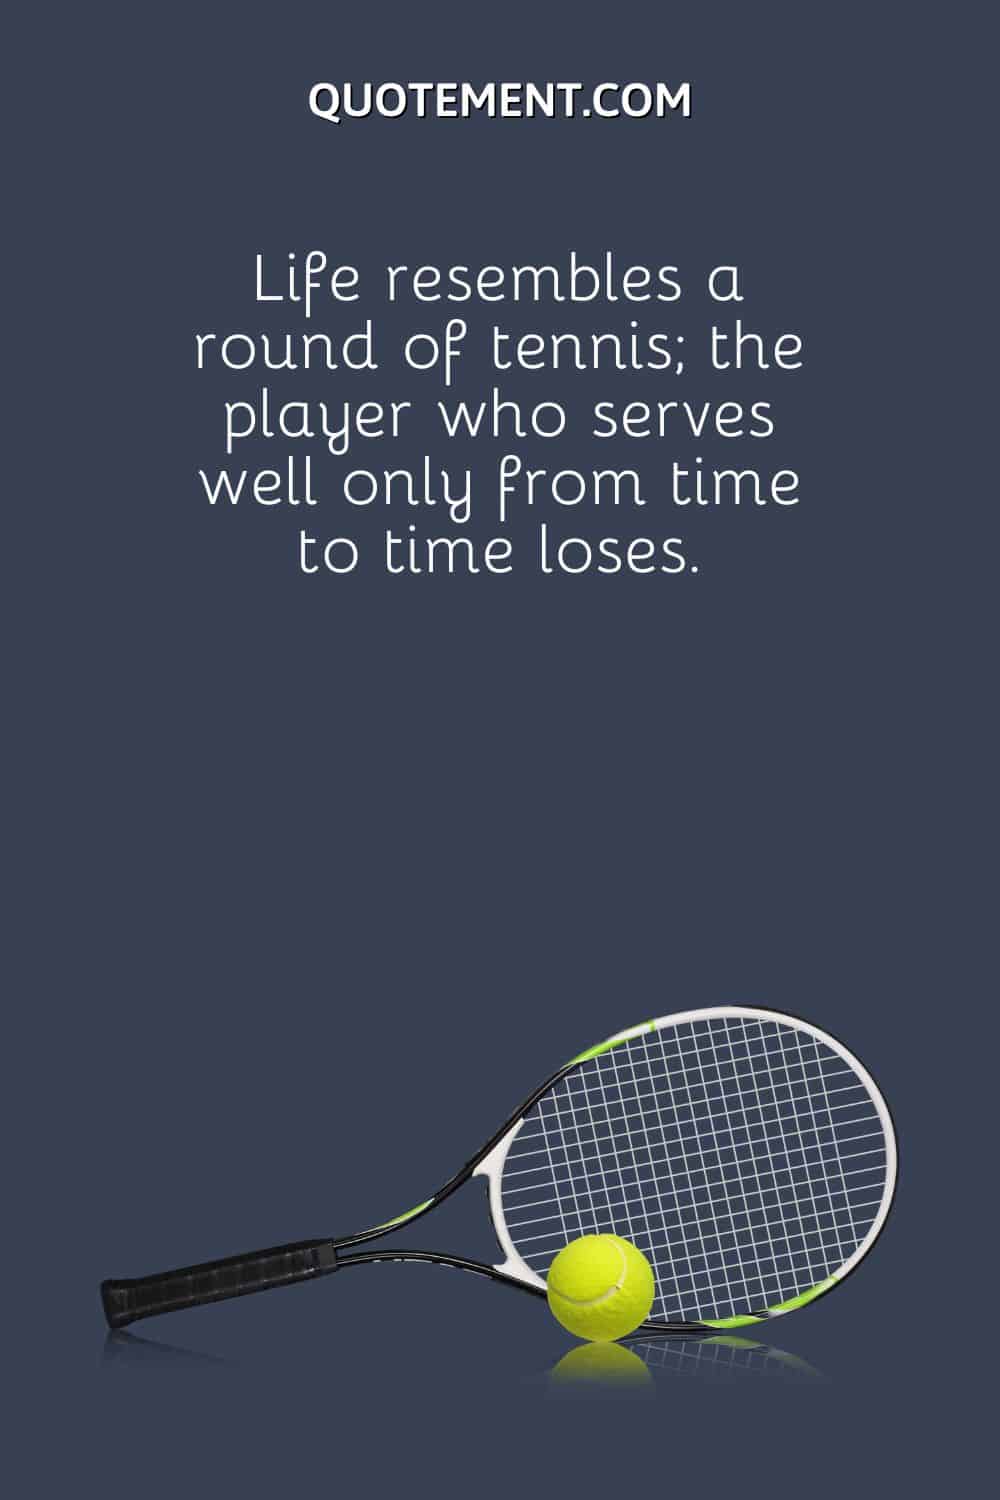 Life resembles a round of tennis; the player who serves well only from time to time loses.